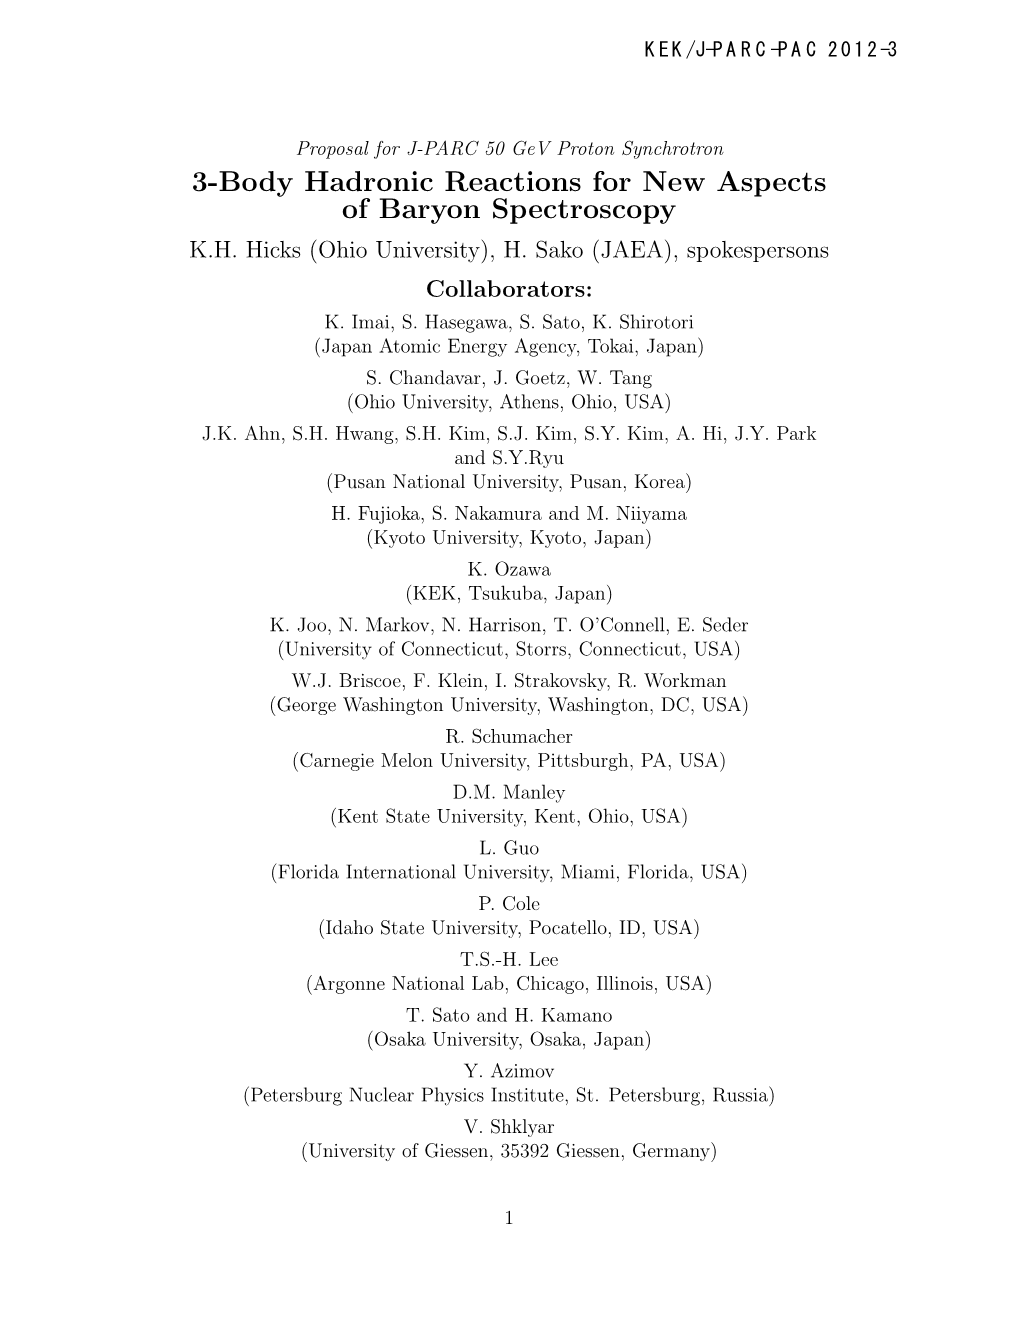 3-Body Hadronic Reactions for New Aspects of Baryon Spectroscopy K.H